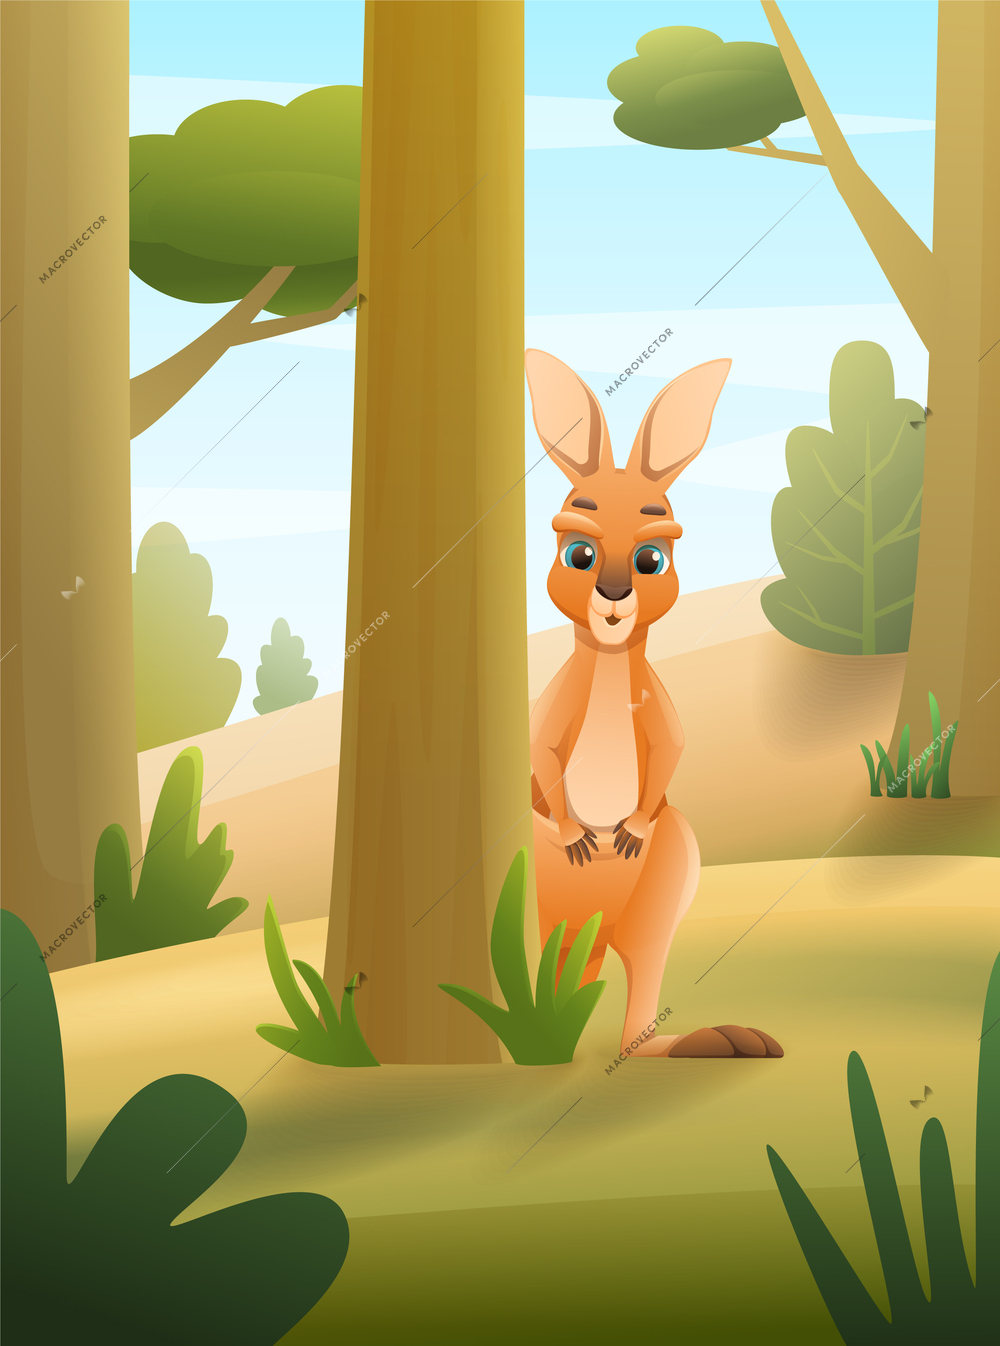 Cute curious kangaroo looking out from behind tree in forest cartoon vector illustration